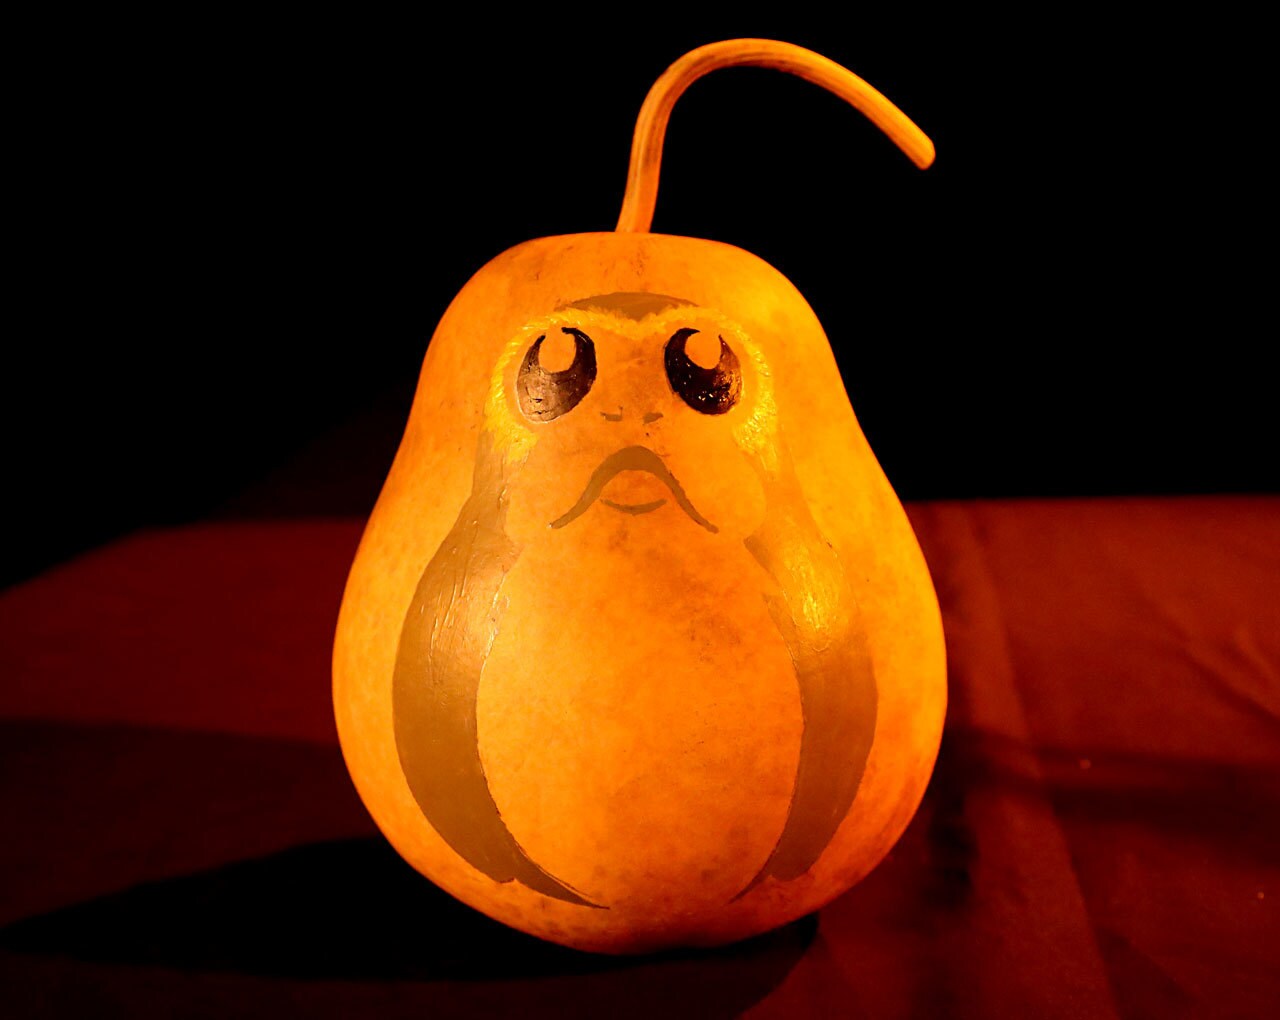 A porg painted onto a gourd using white, black, and gold acrylic paints.